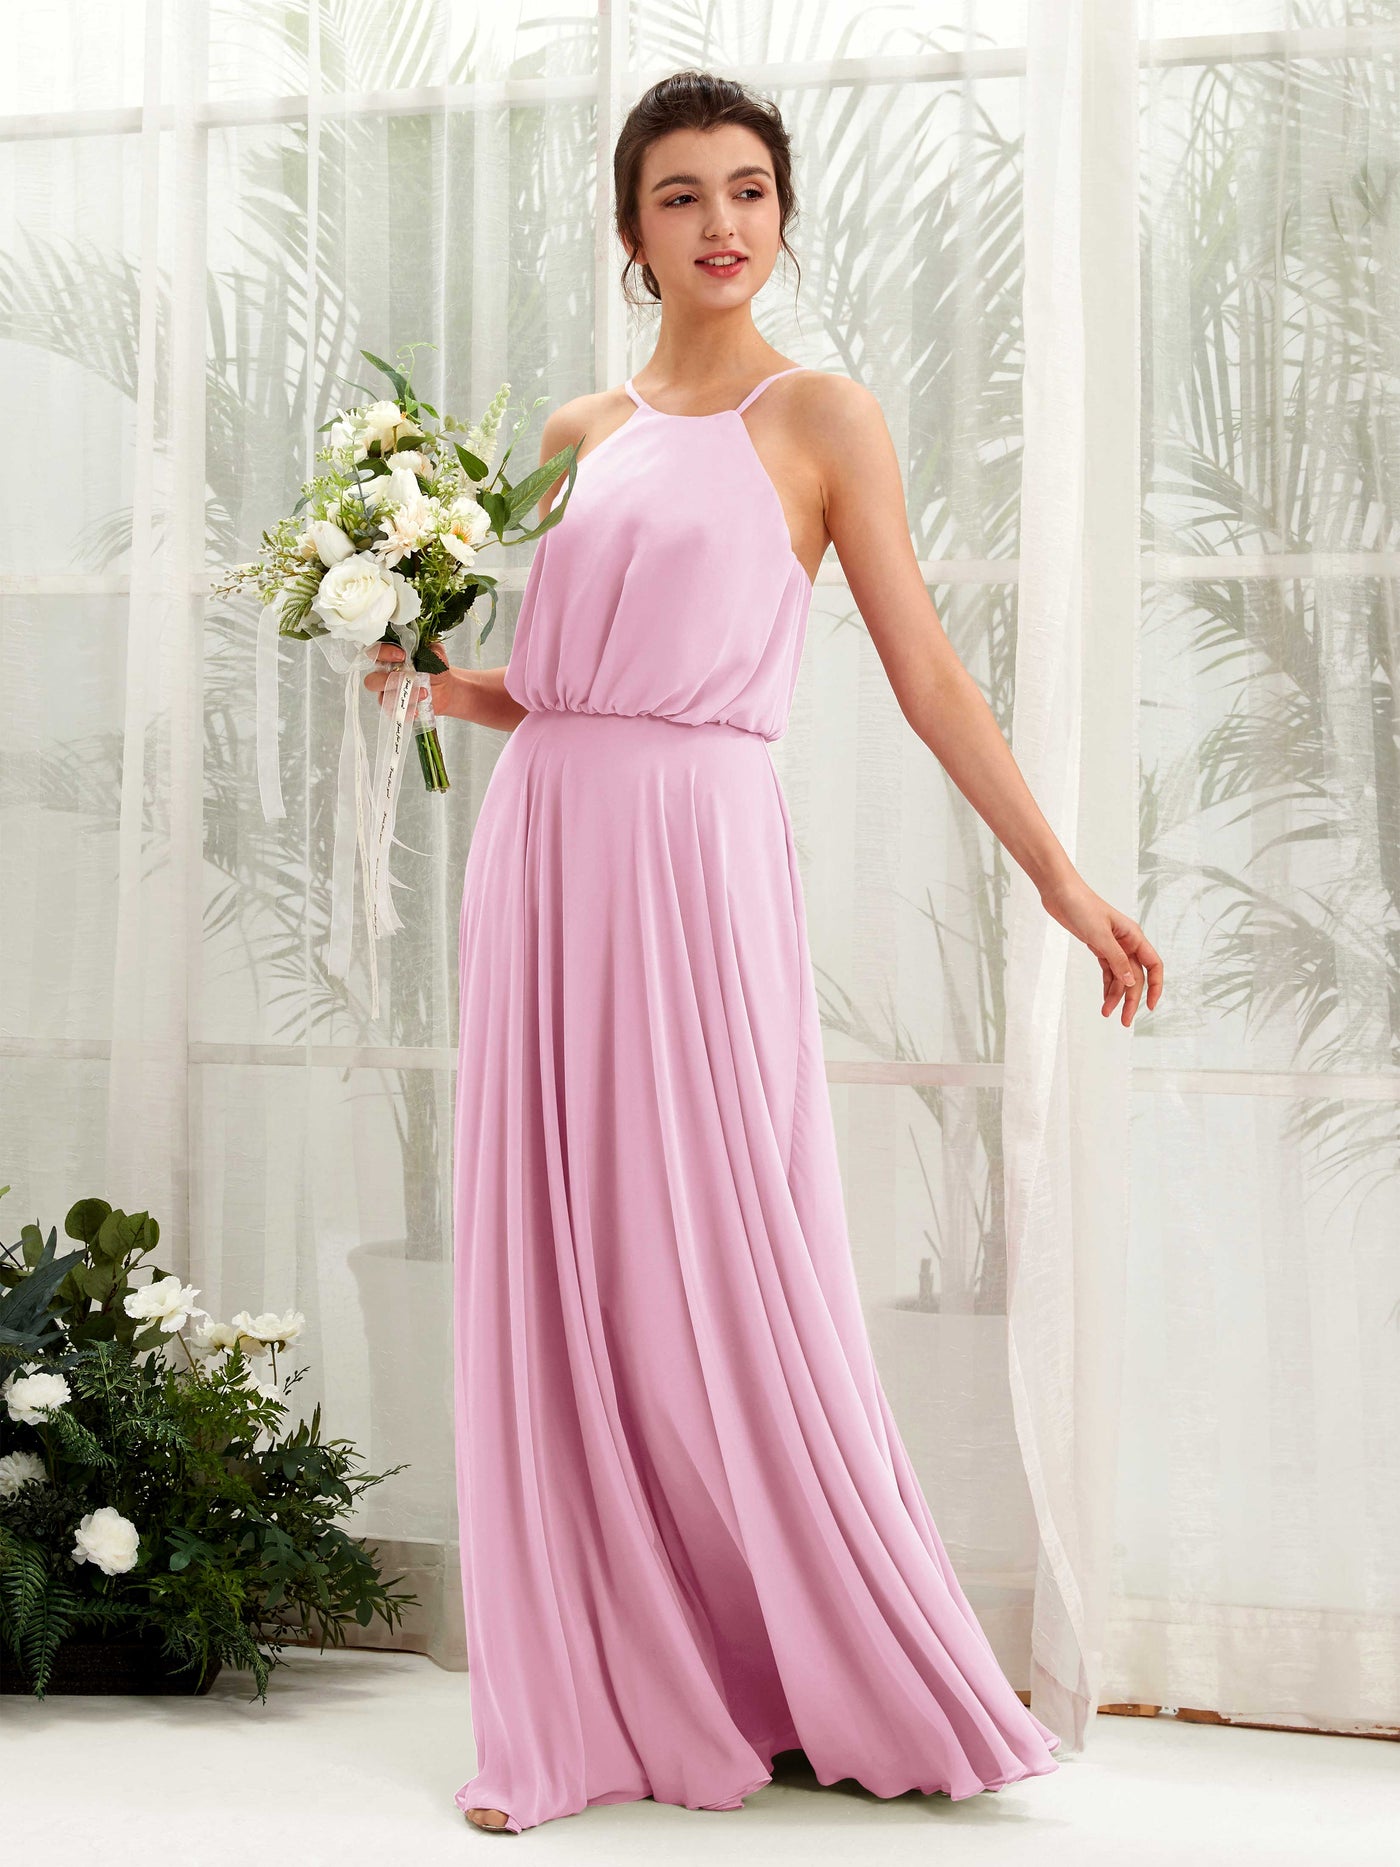 Candy Pink Bridesmaid Dresses Bridesmaid Dress Ball Gown Chiffon Halter Full Length Sleeveless Wedding Party Dress (81223439)#color_candy-pink